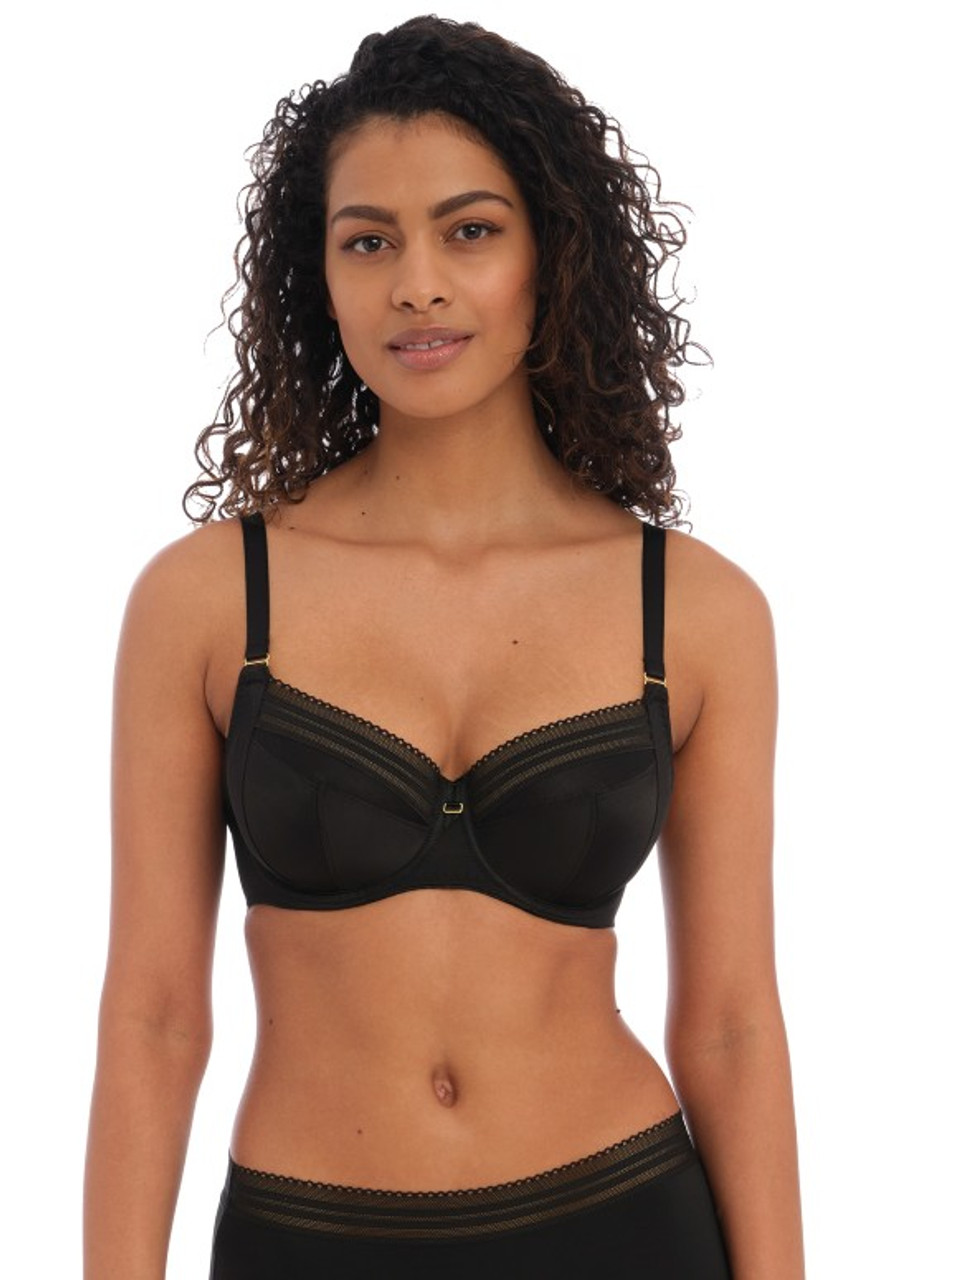 The Short Way - Lingerie Sports Bras - The Short Way